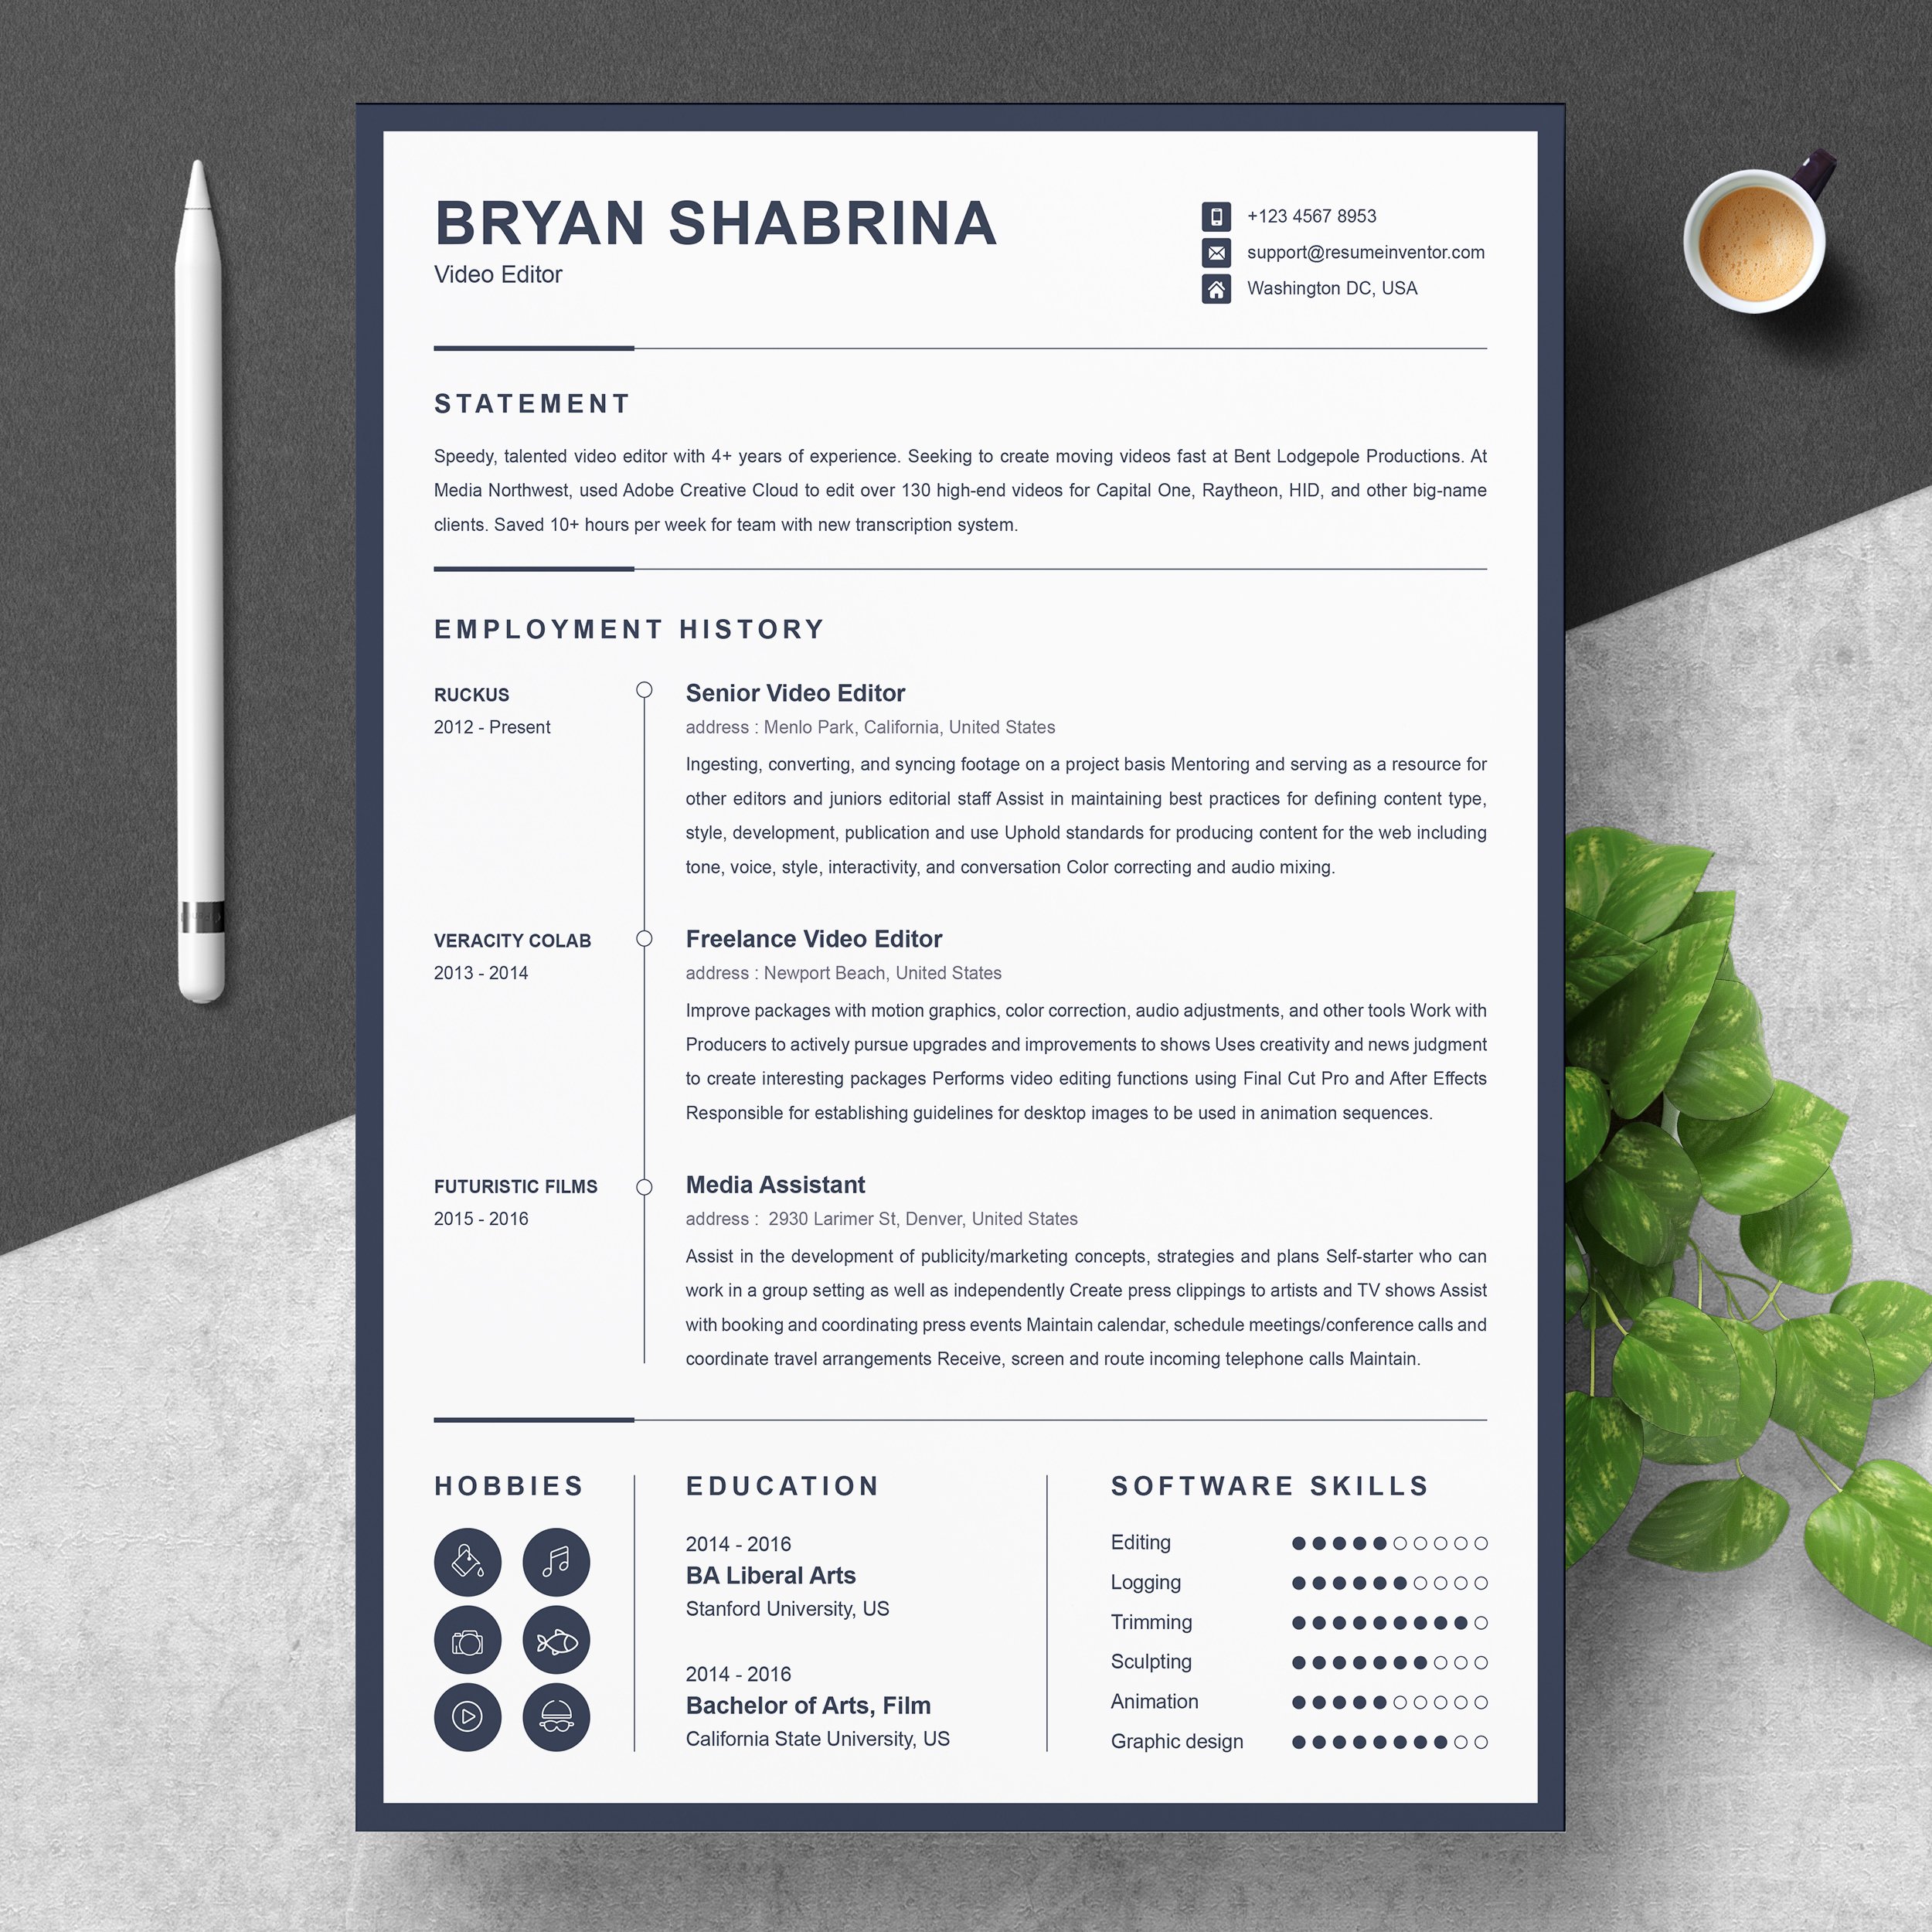 Resume / CV for Video Editor cover image.